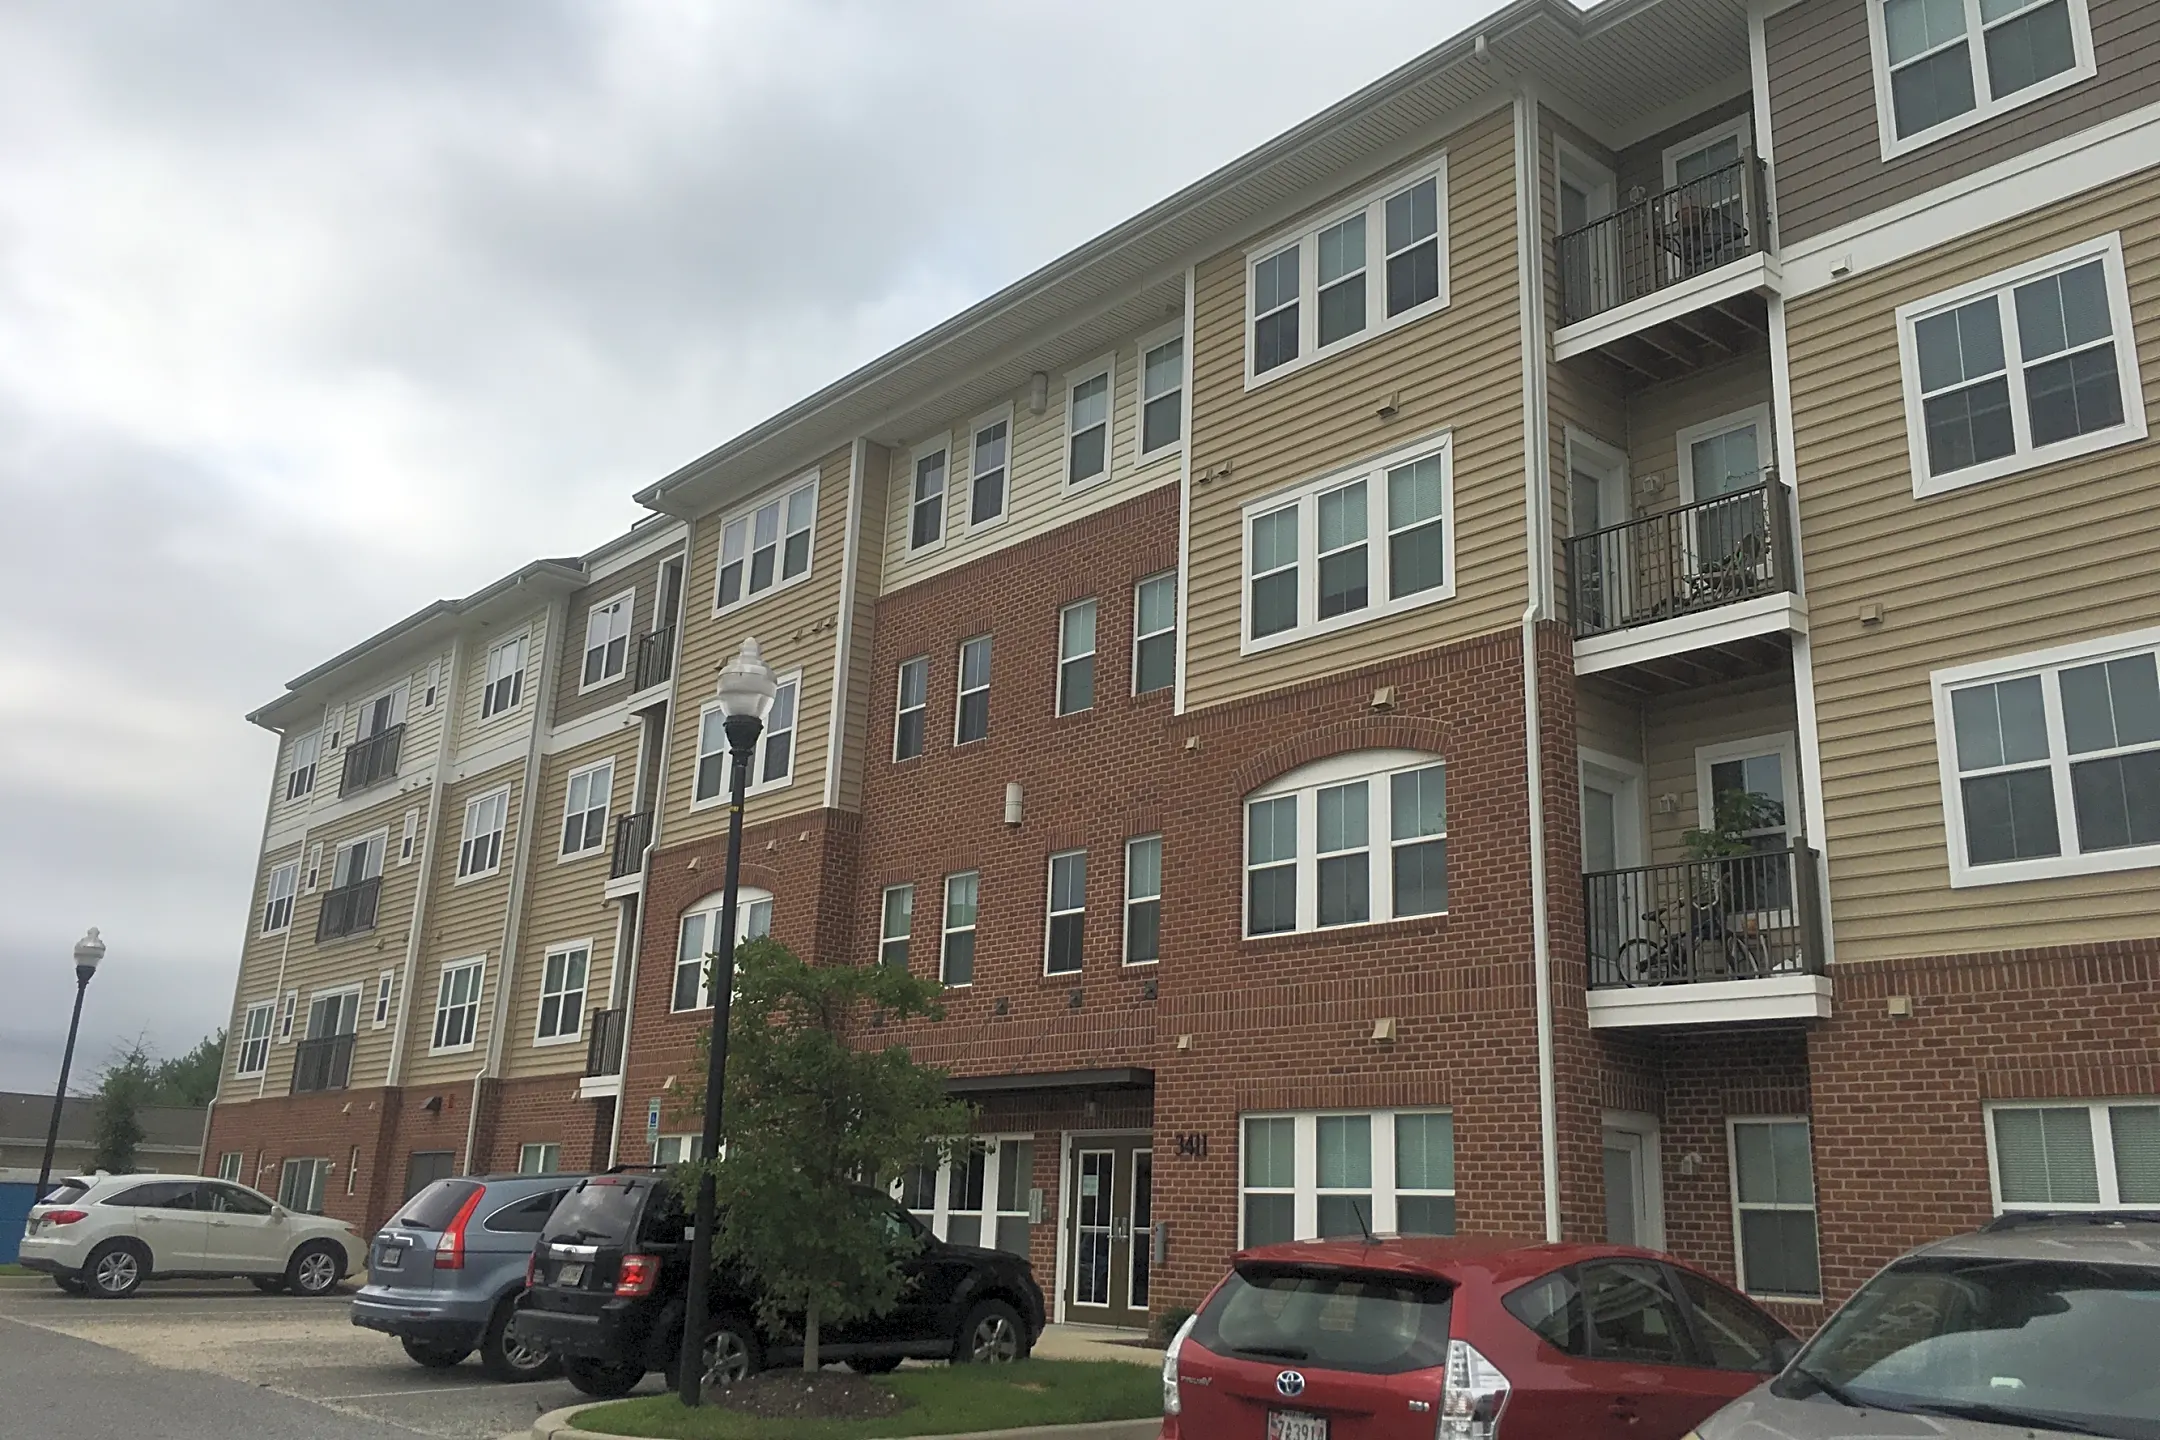 Pool - Orchard Meadows Apartments/Clubhouse/Pool (142 Units) - Ellicott City, MD